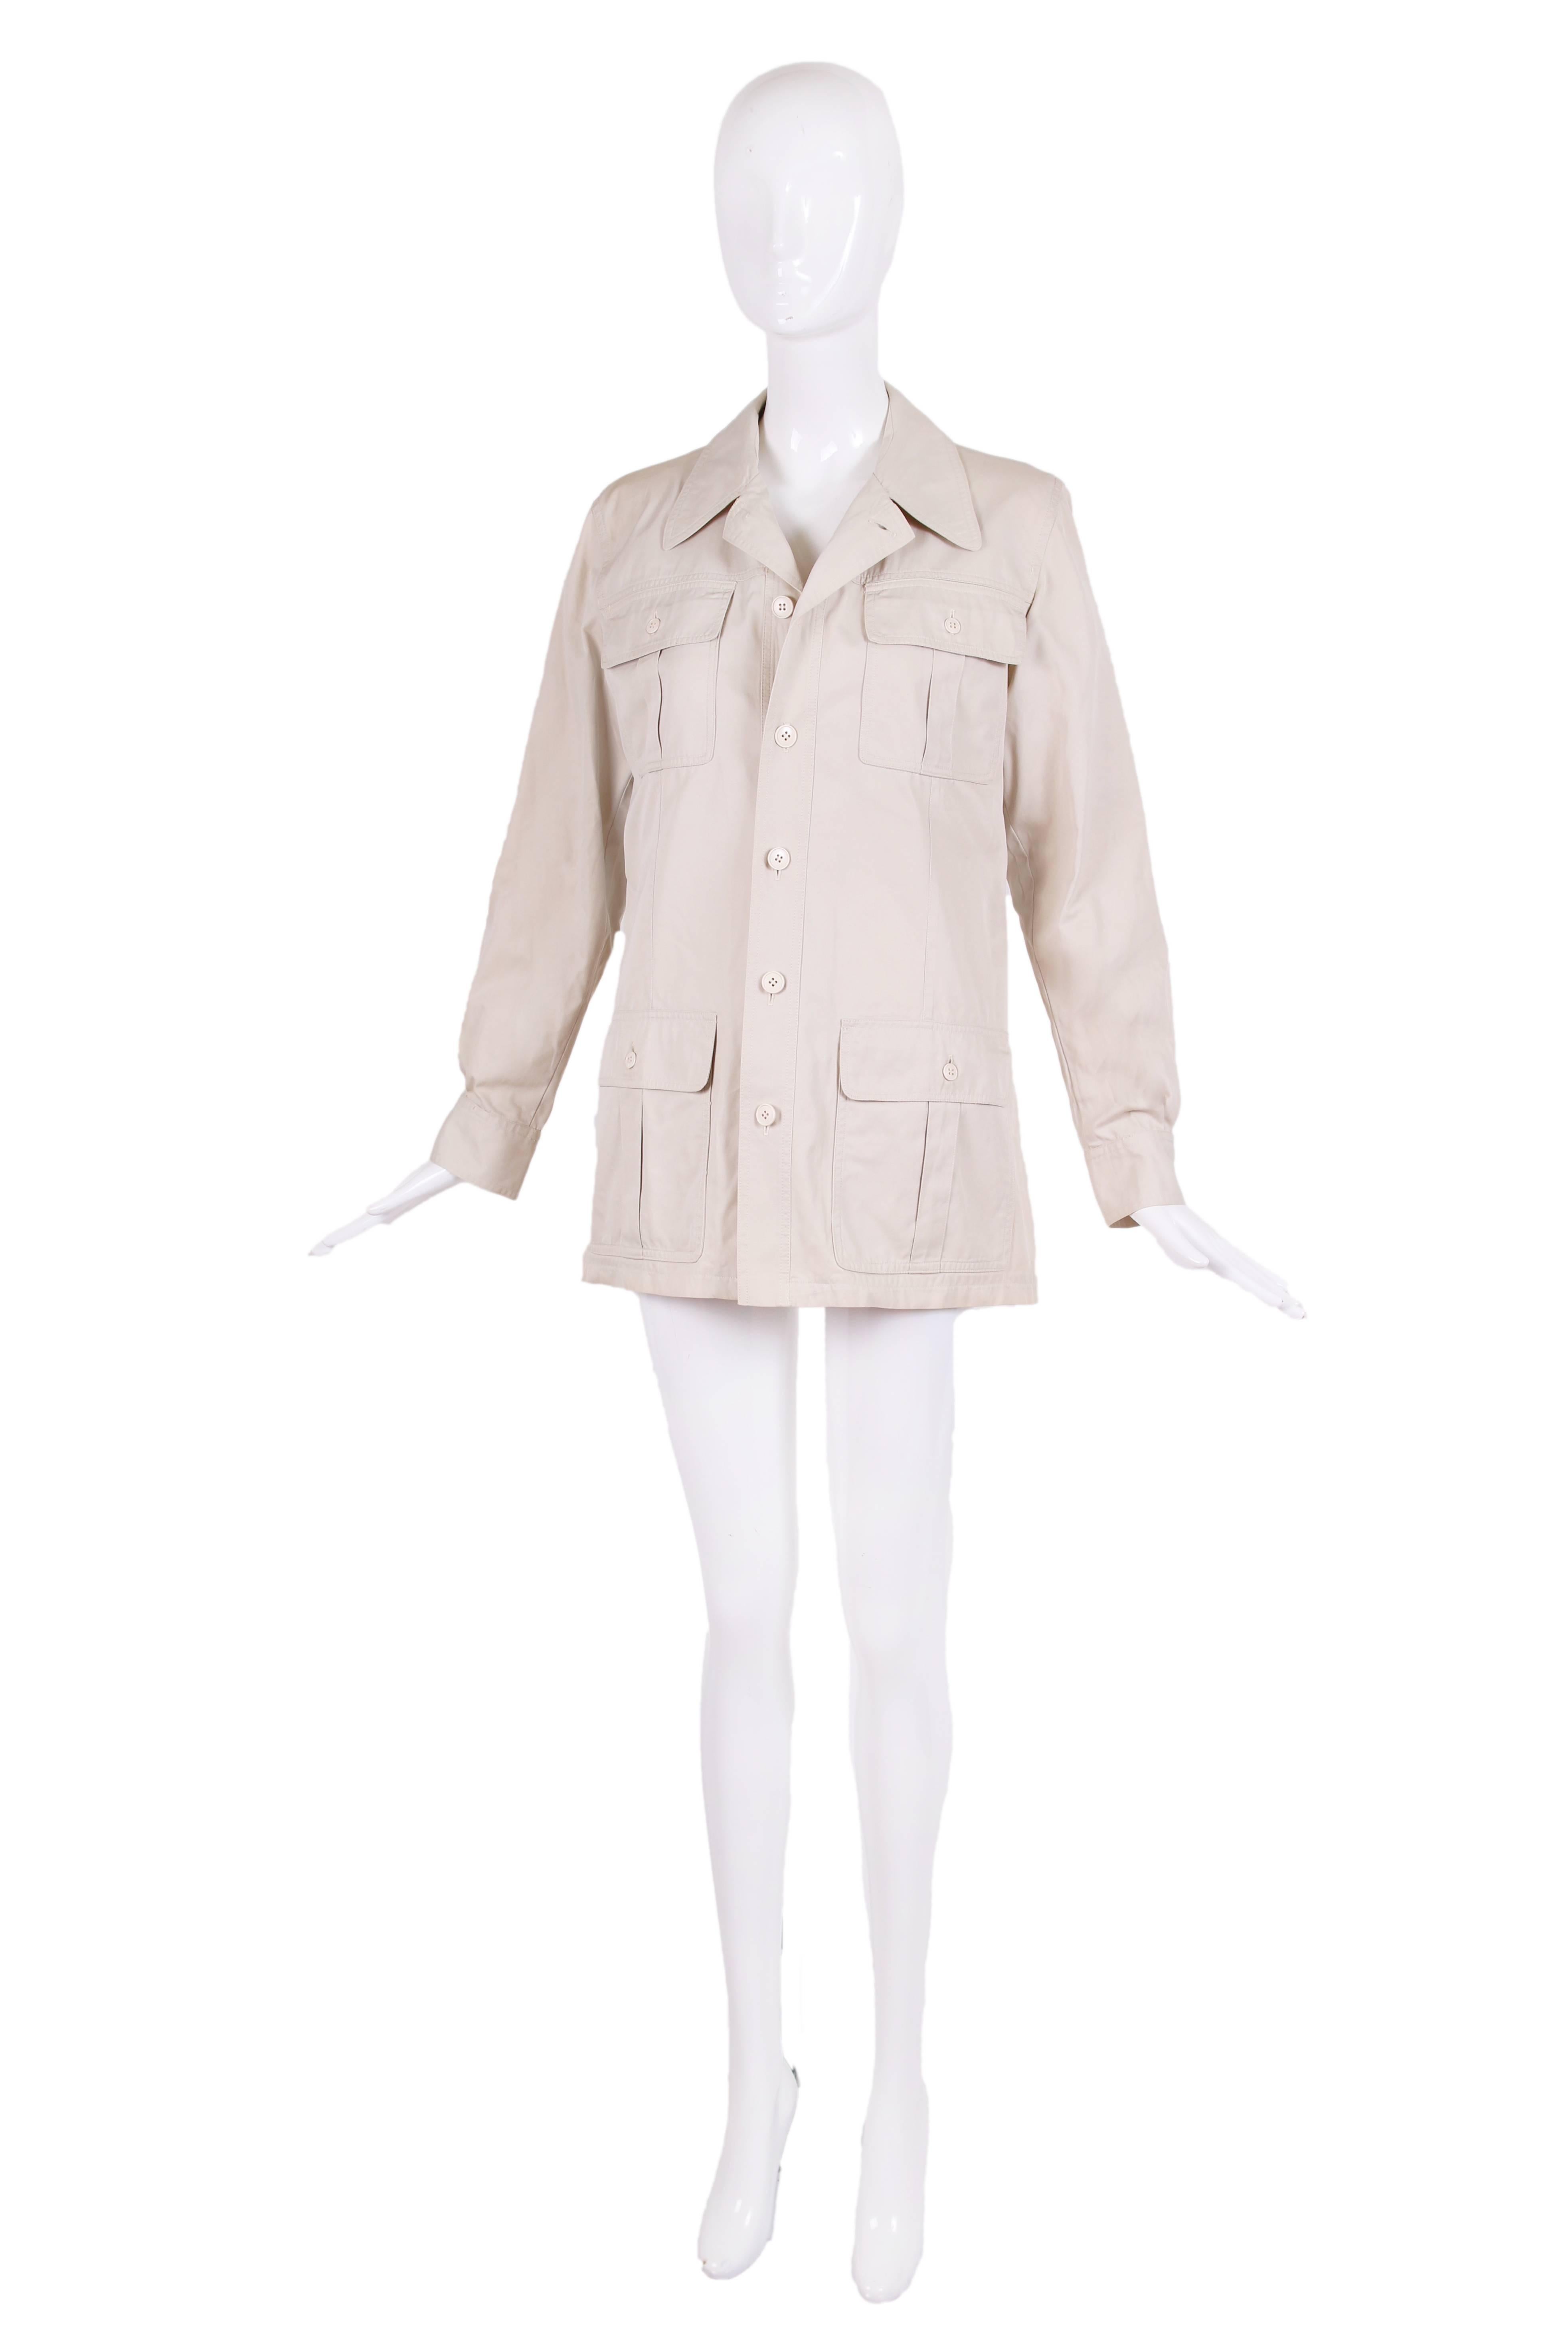 1970's Yves Saint Laurent off white/creme 100% cotton safari jacket with four frontal pockets, a vent at the back, notched collar and barrel cuffs with two buttons. In excellent condition - no size tag please see